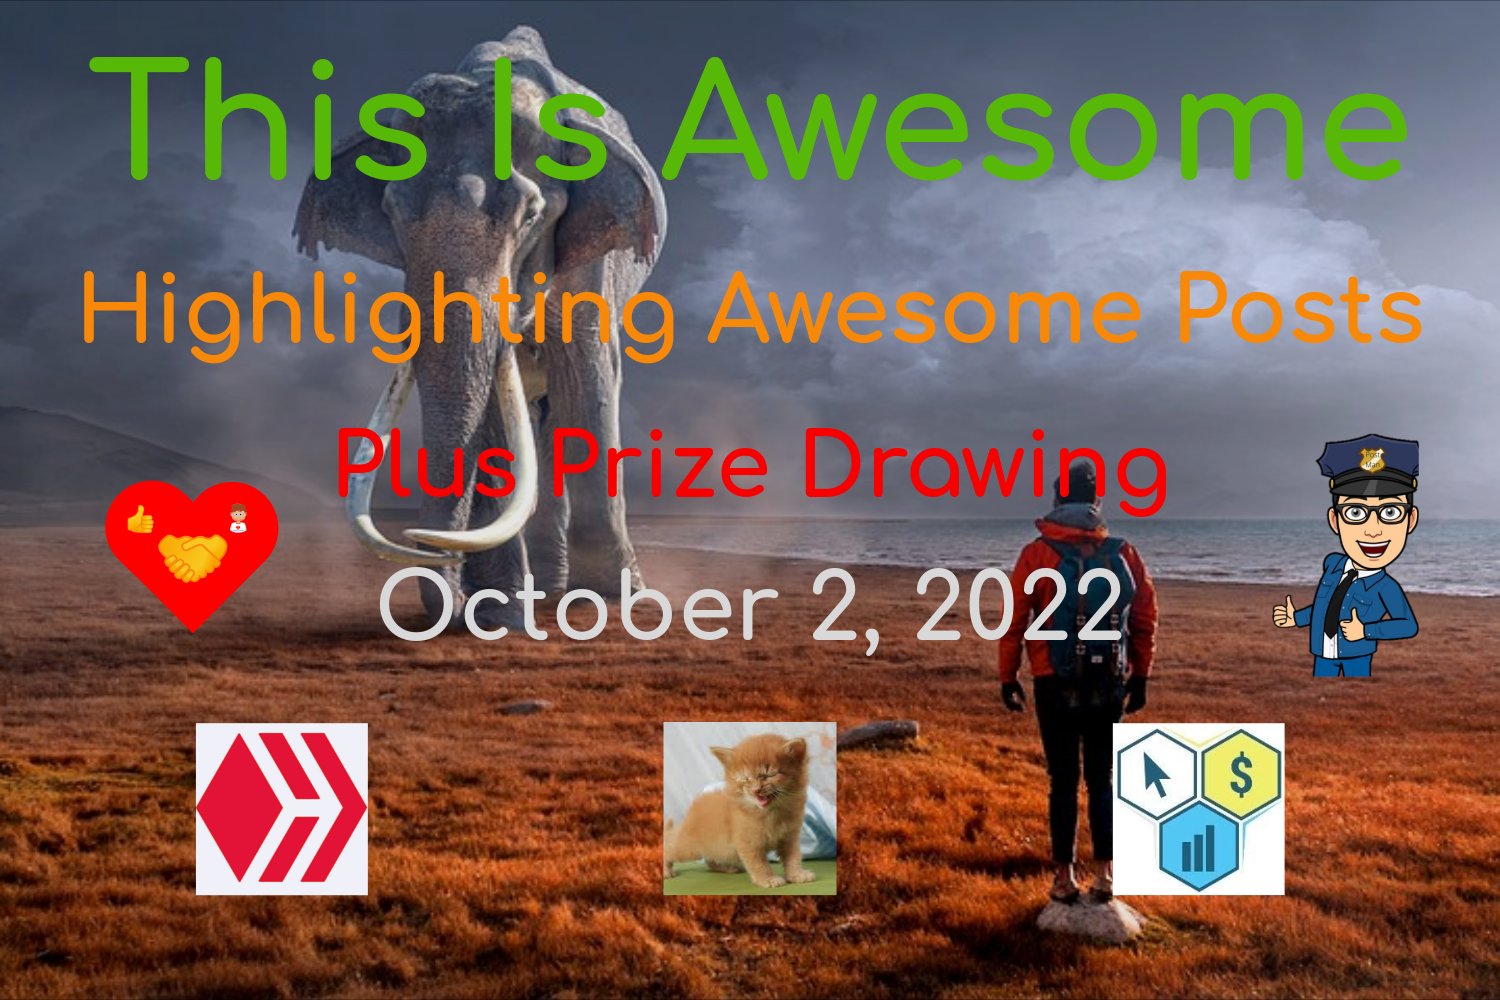 @thisisawesome/this-is-awesome-highlighting-awesome-posts-plus-prize-drawing-october-2-2022